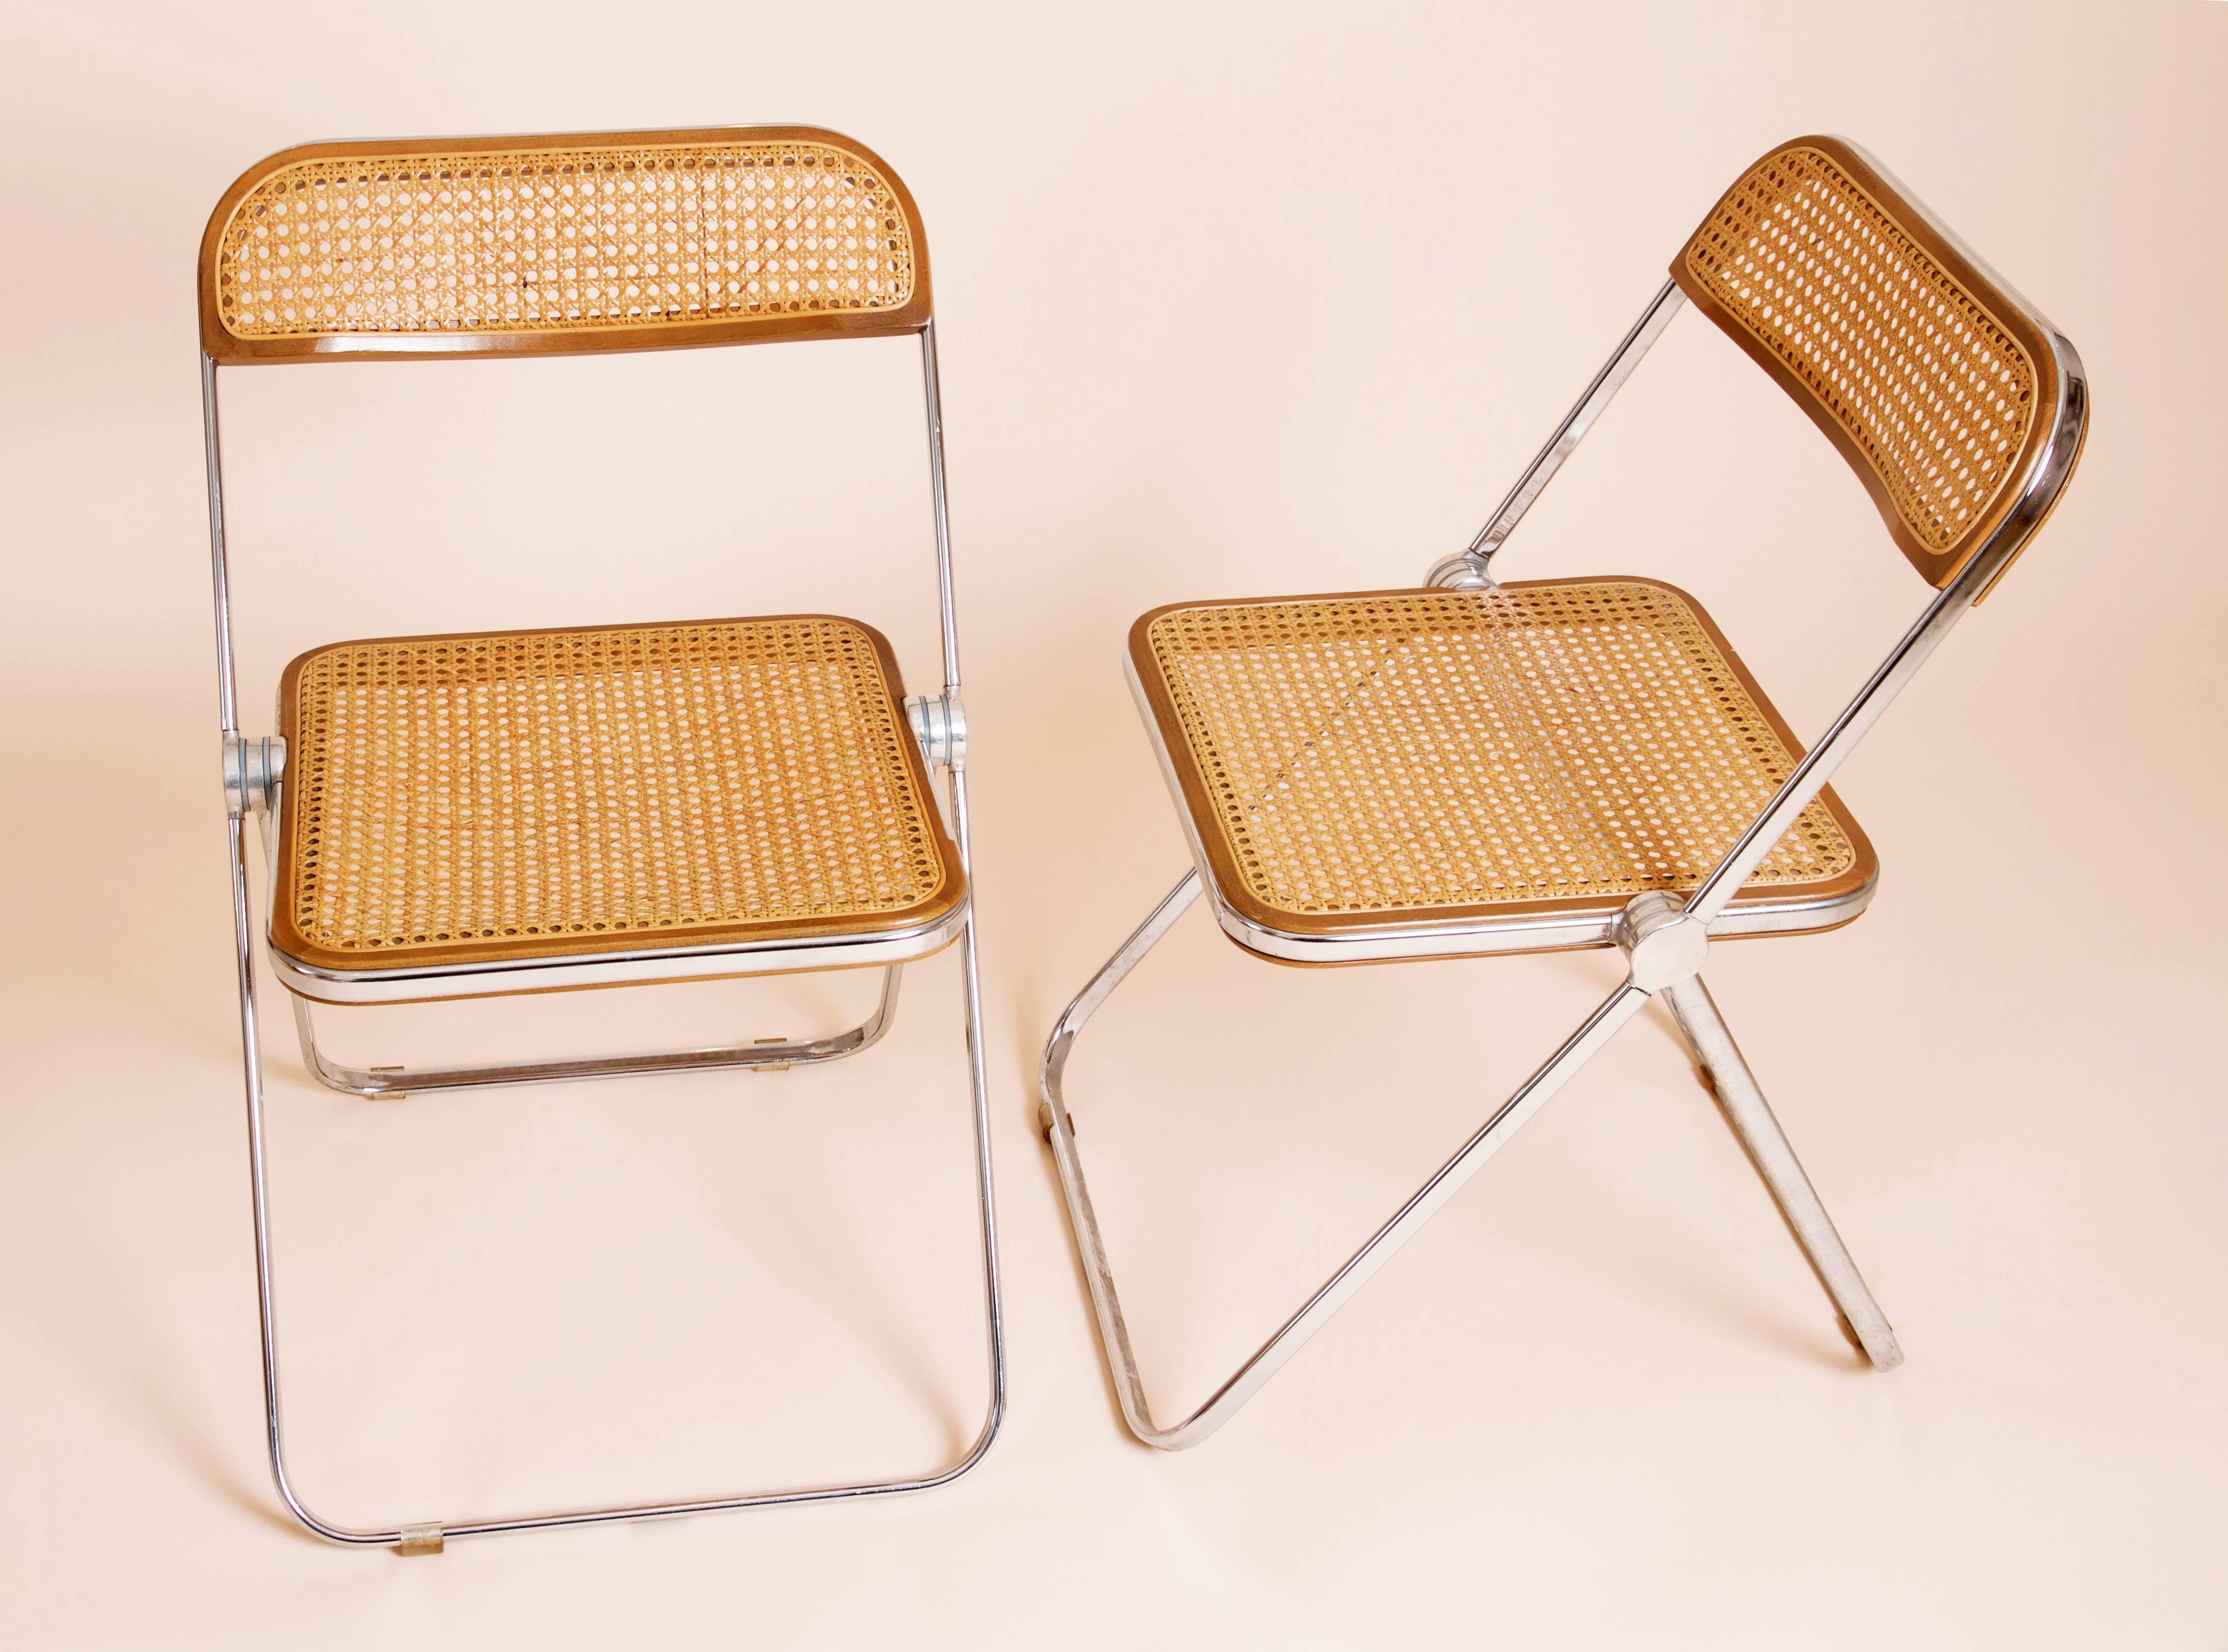 Rare set of ten 'Plia' folding chairs designed by Giancarlo Piretti for Castelli in 1969. 
The seat is made of chrome frame with beige caning seating and back. 
The caning is also framed and fixed to the chrome by a beautiful wooden contour, that